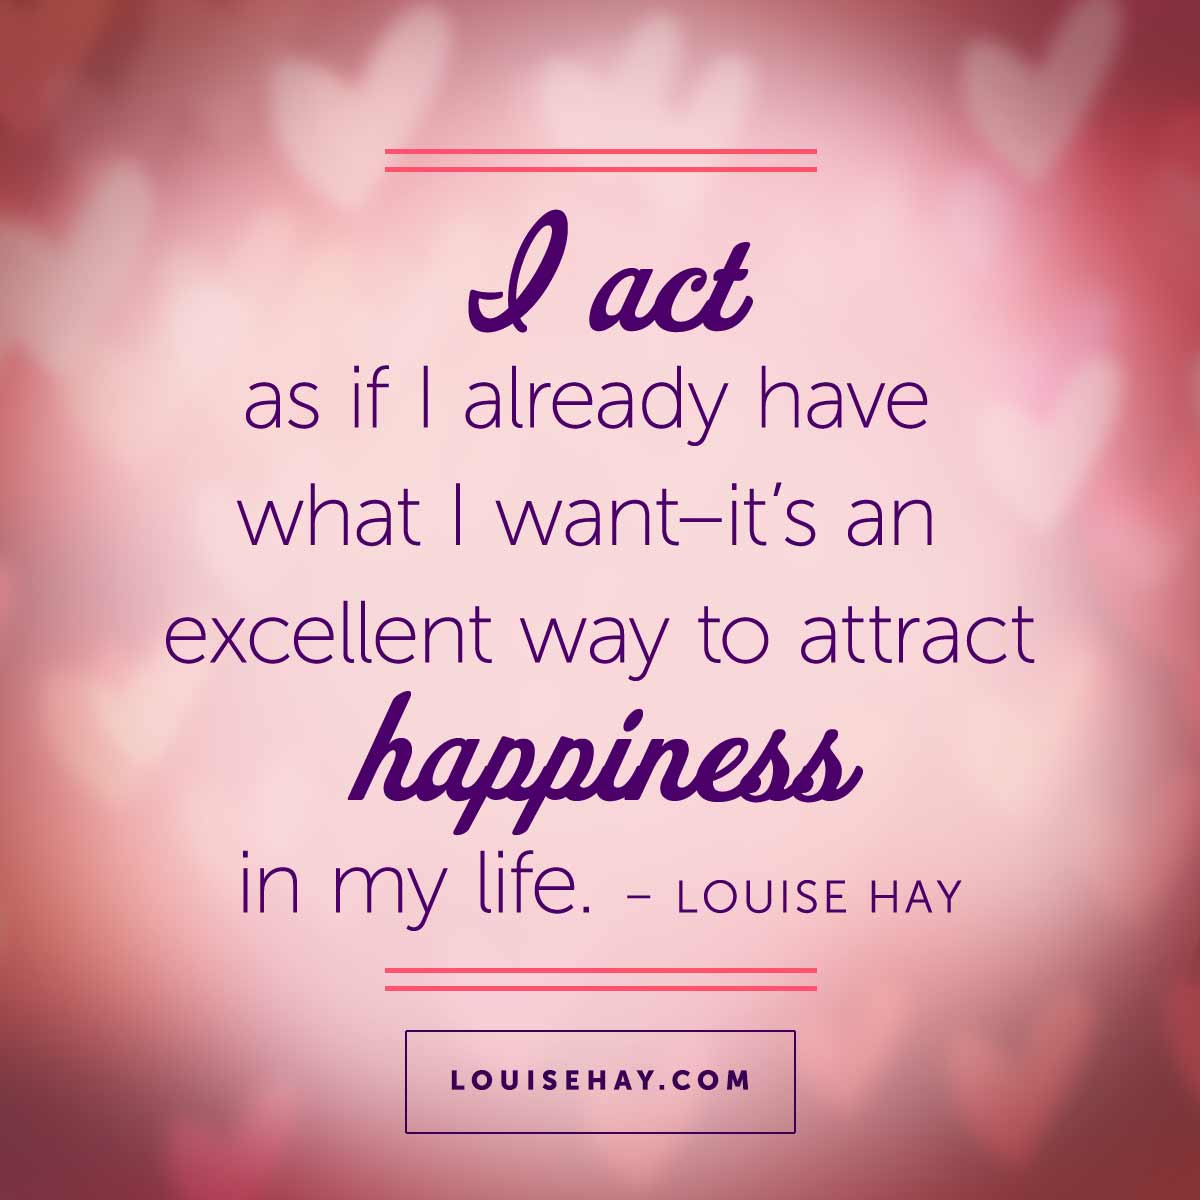 Louise Hay Affirmation Inspirational Quotes